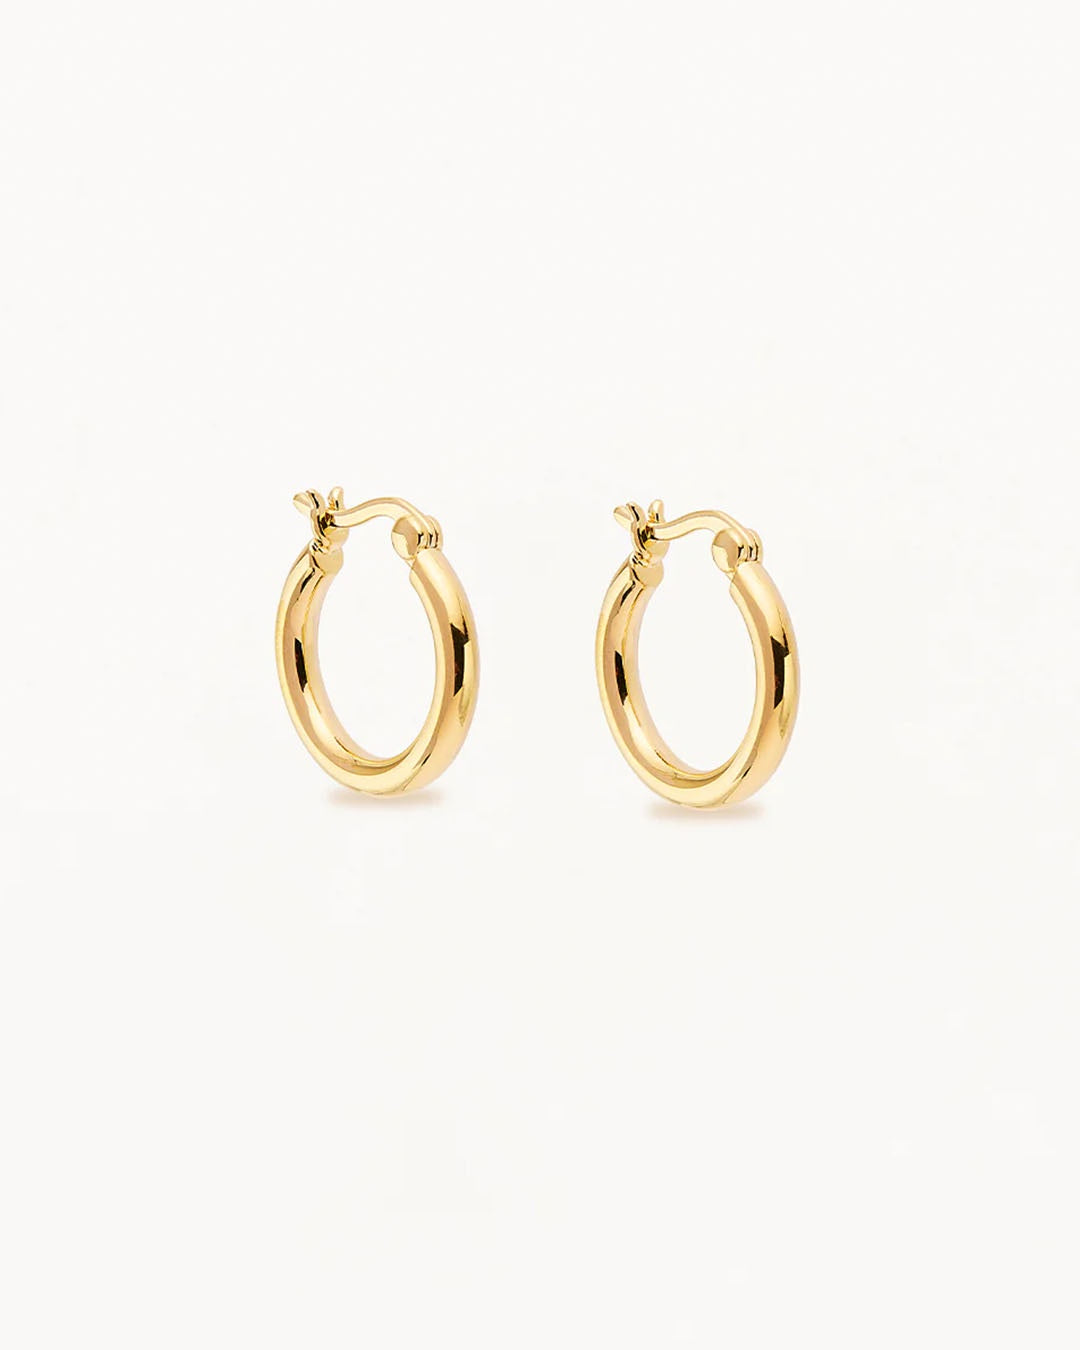 Gold Sunrise Small Hoops Earrings by By Charlotte - Prae Store